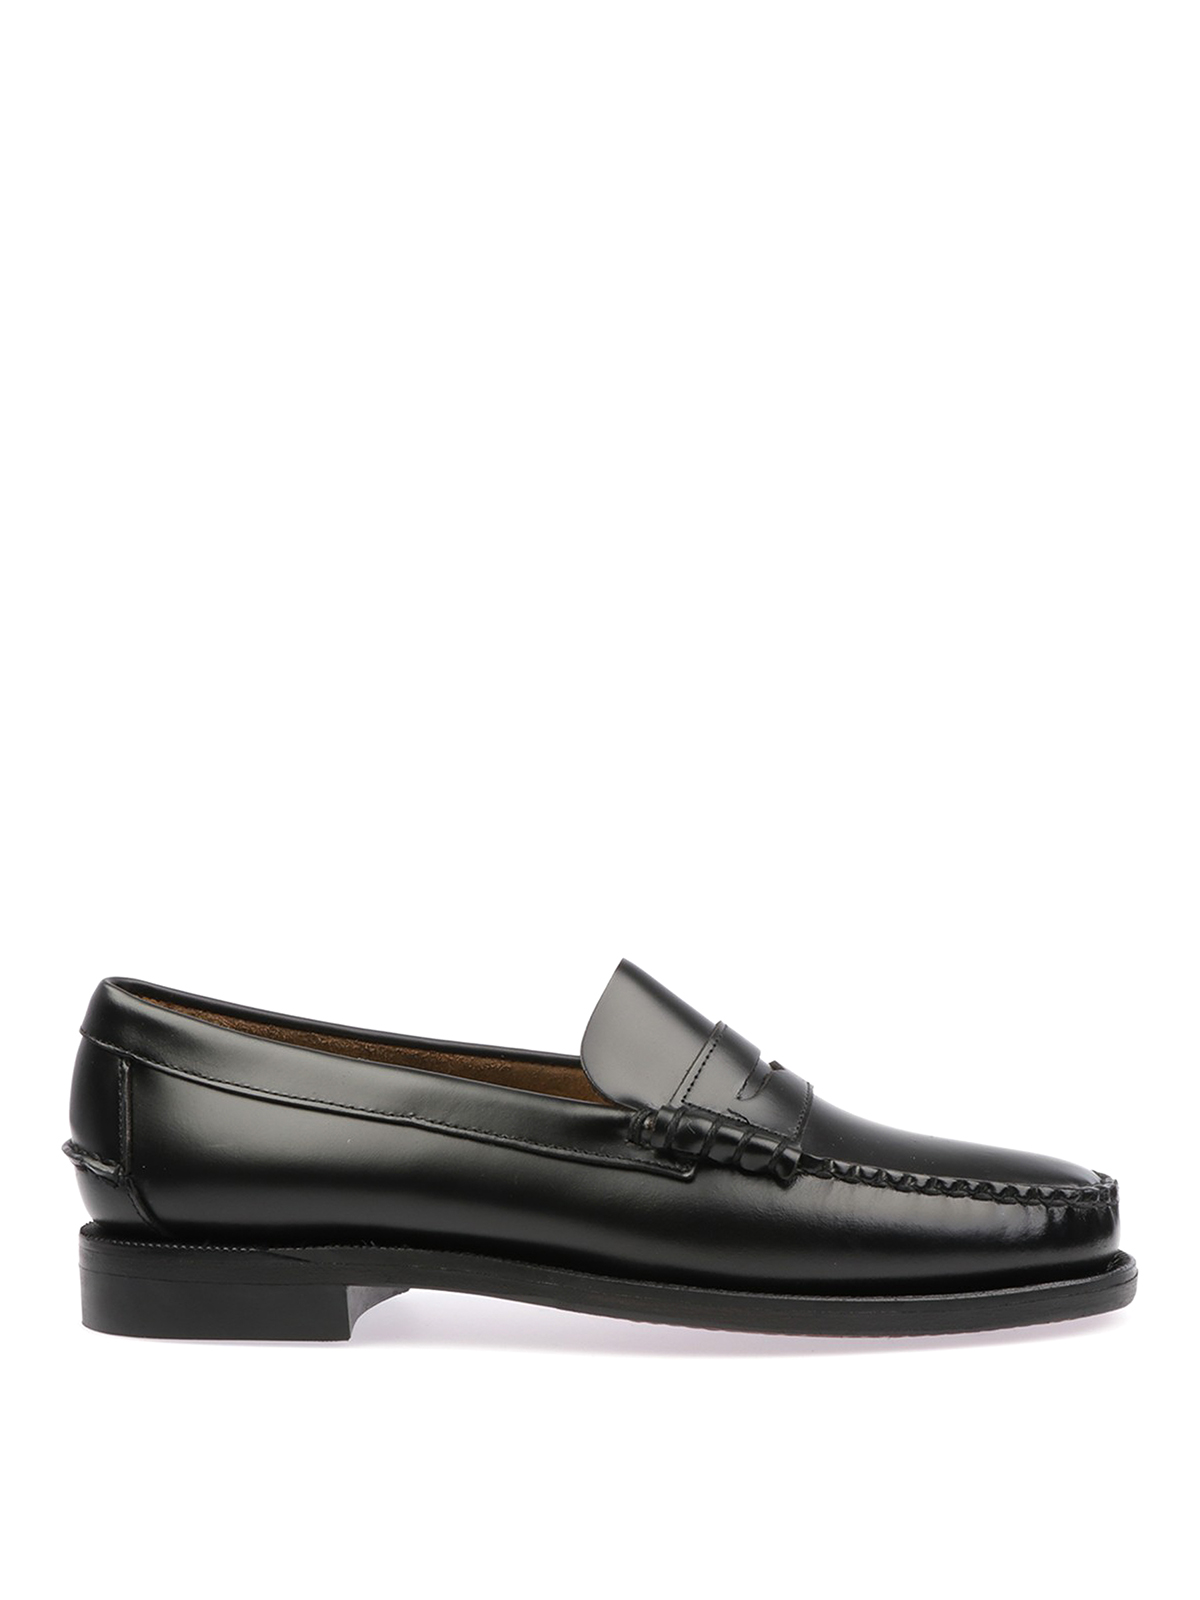 F.Kr. Ride udredning Loafers & Slippers Sebago - Classic penny loafers - 7000300902